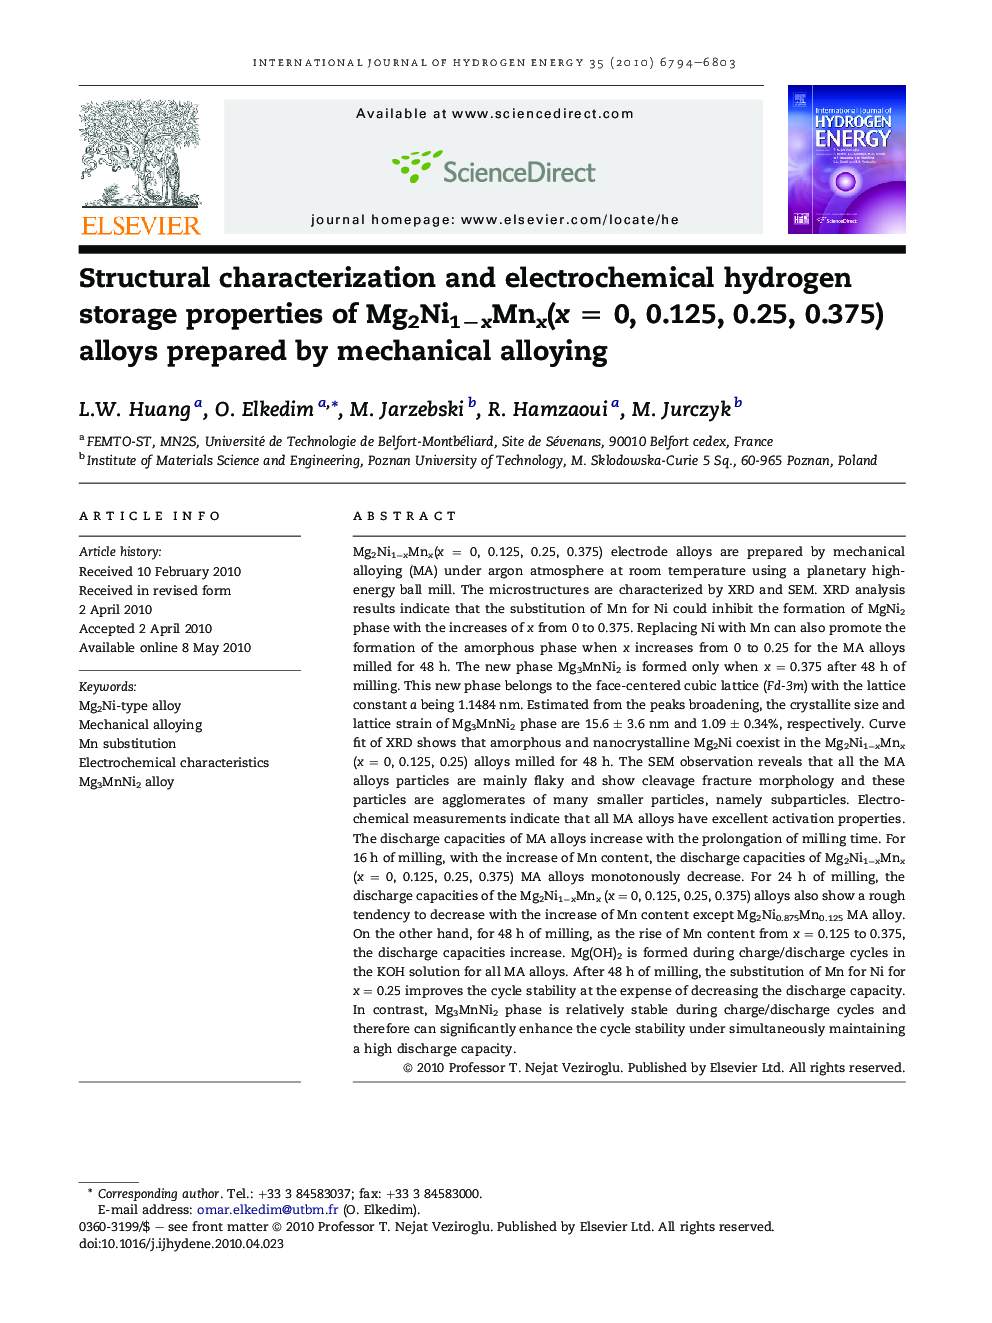 Structural characterization and electrochemical hydrogen storage properties of Mg2Ni1−xMnx(x = 0, 0.125, 0.25, 0.375) alloys prepared by mechanical alloying